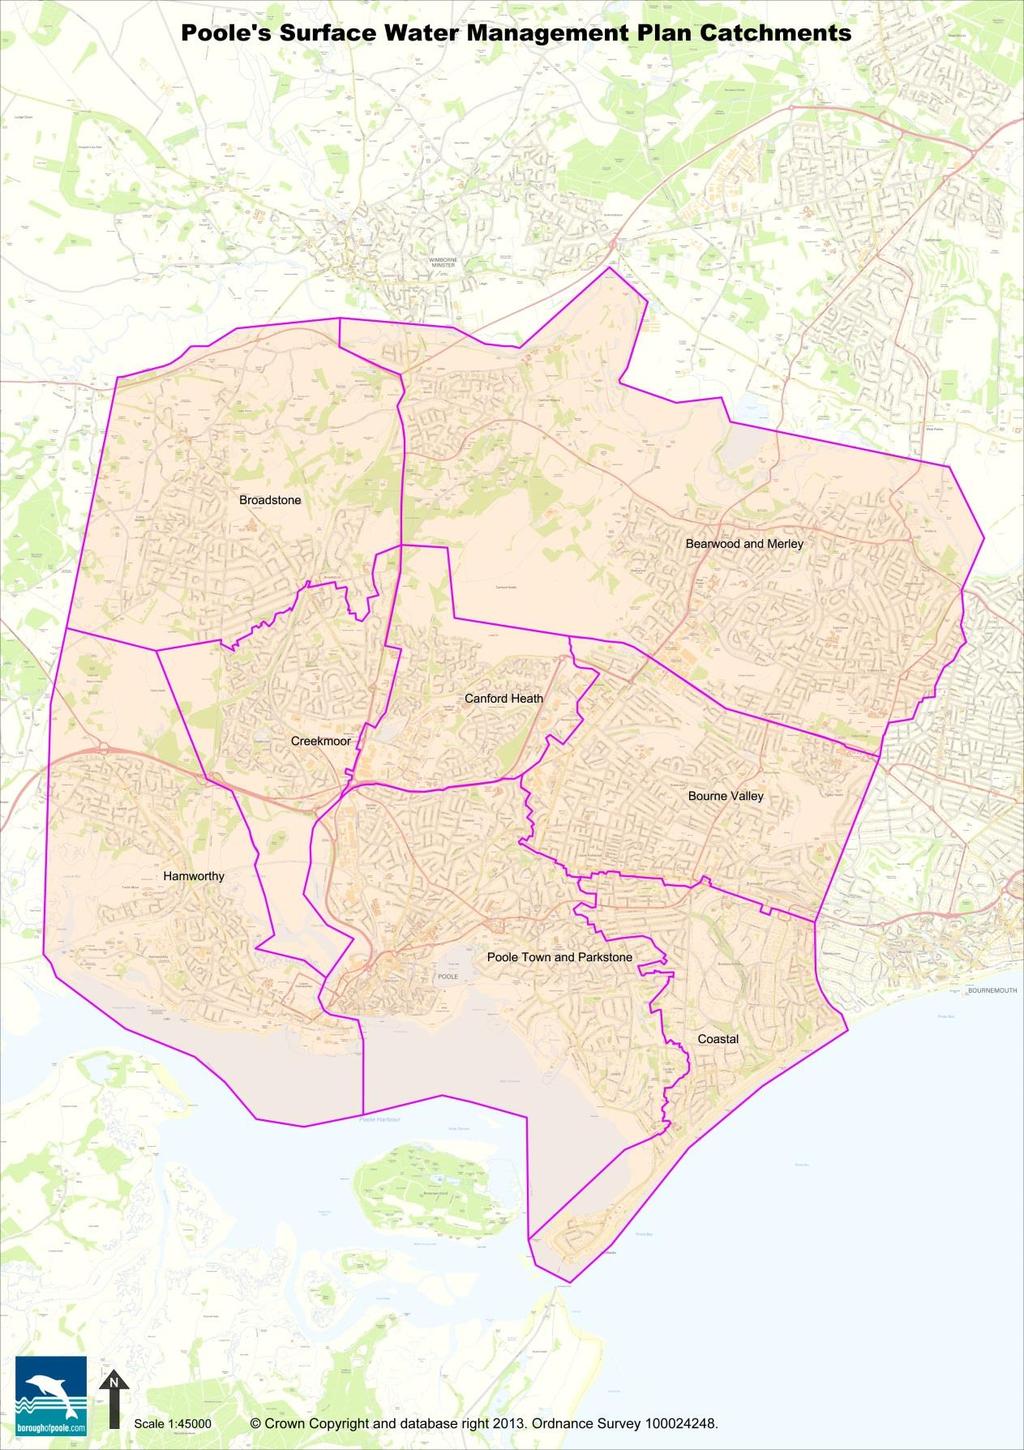 Appendix B SURFACE WATER FLOOD RISK CATCHMENT AREAS IN POOLE The Surface Water Management Plan boundaries follow,